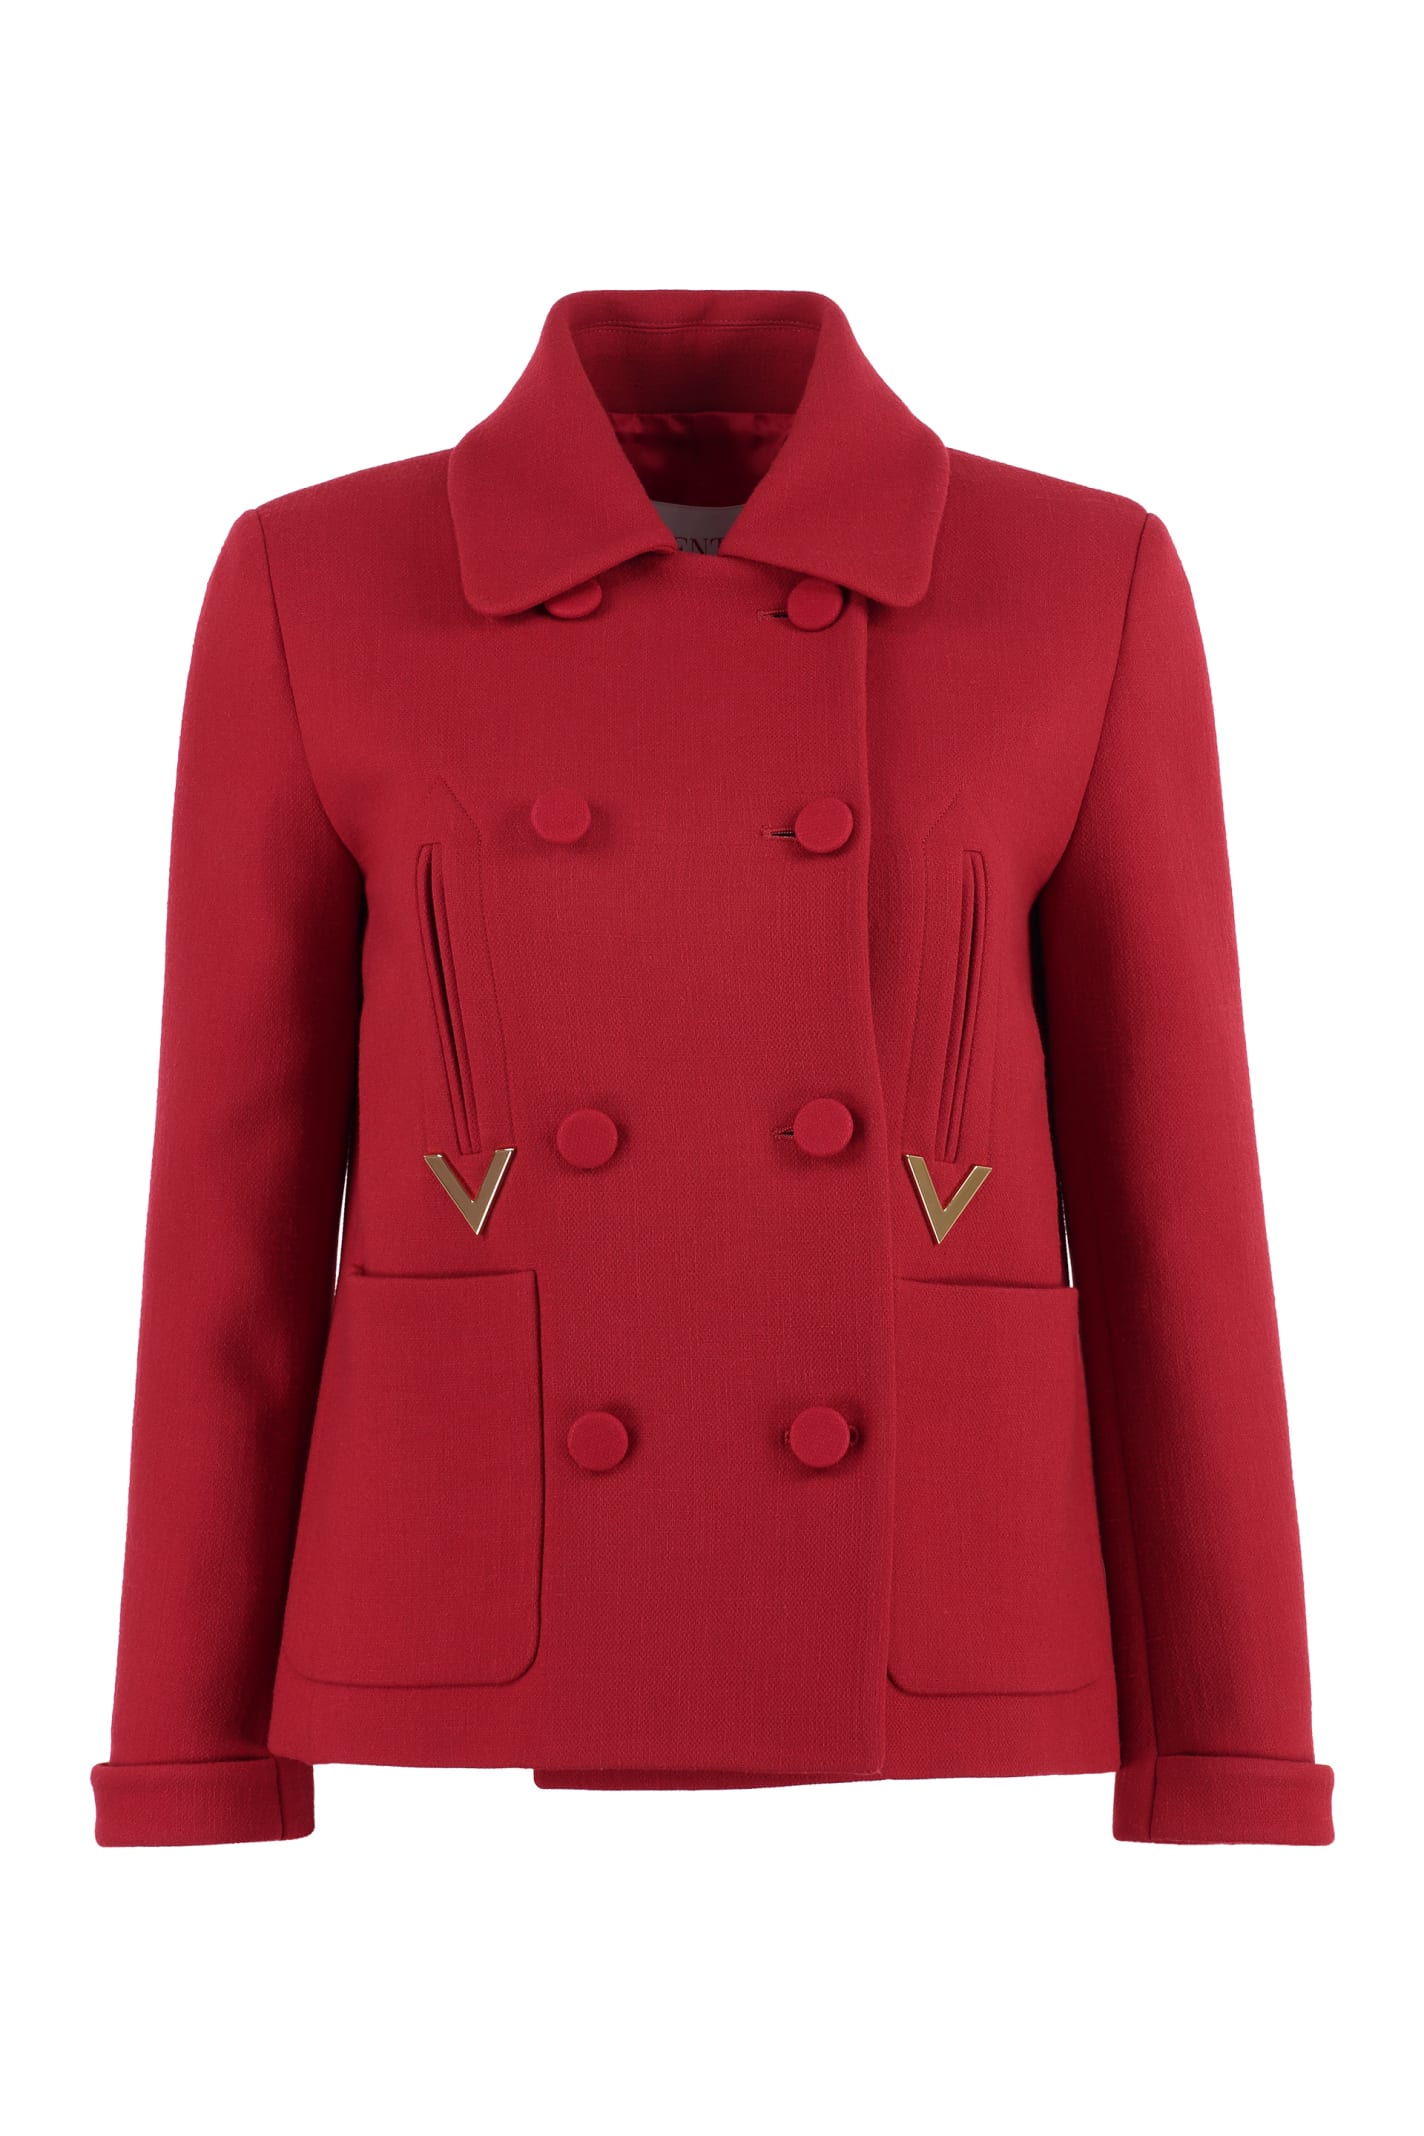 VALENTINO DOUBLE-BREASTED WOOL JACKET